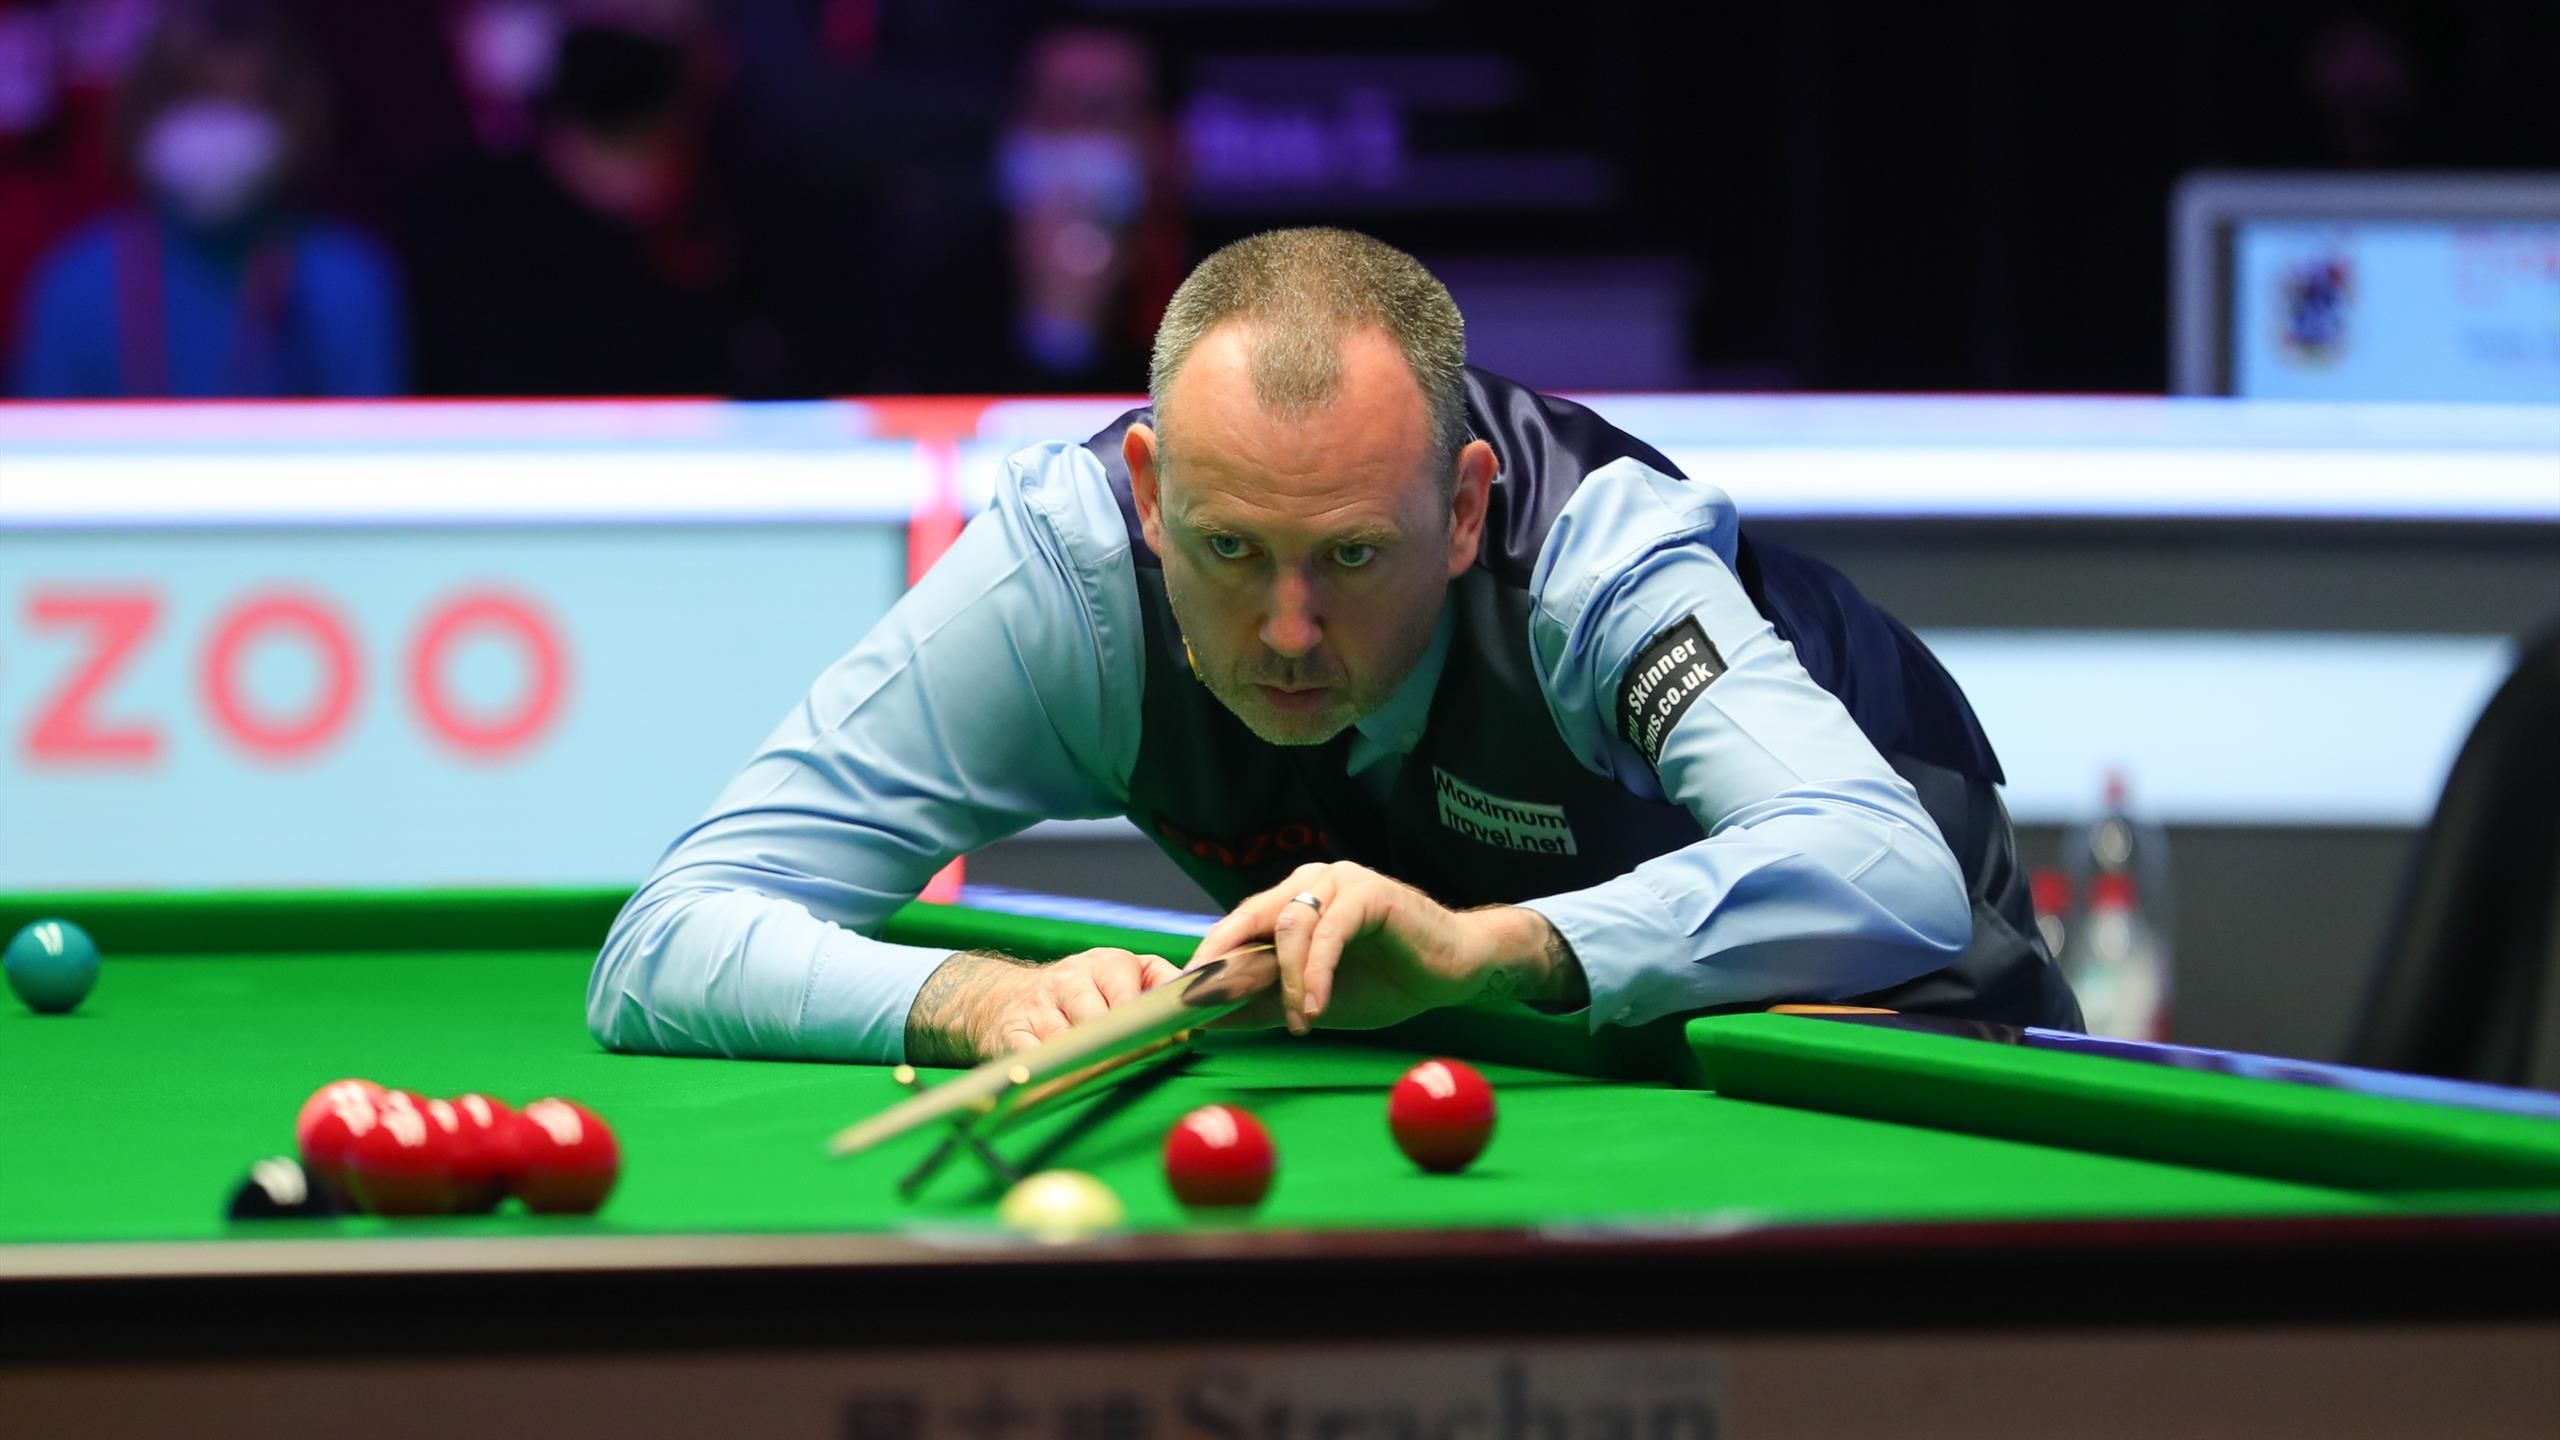 Mark Williams eases into last 16 of Snooker Shoot Out, world No